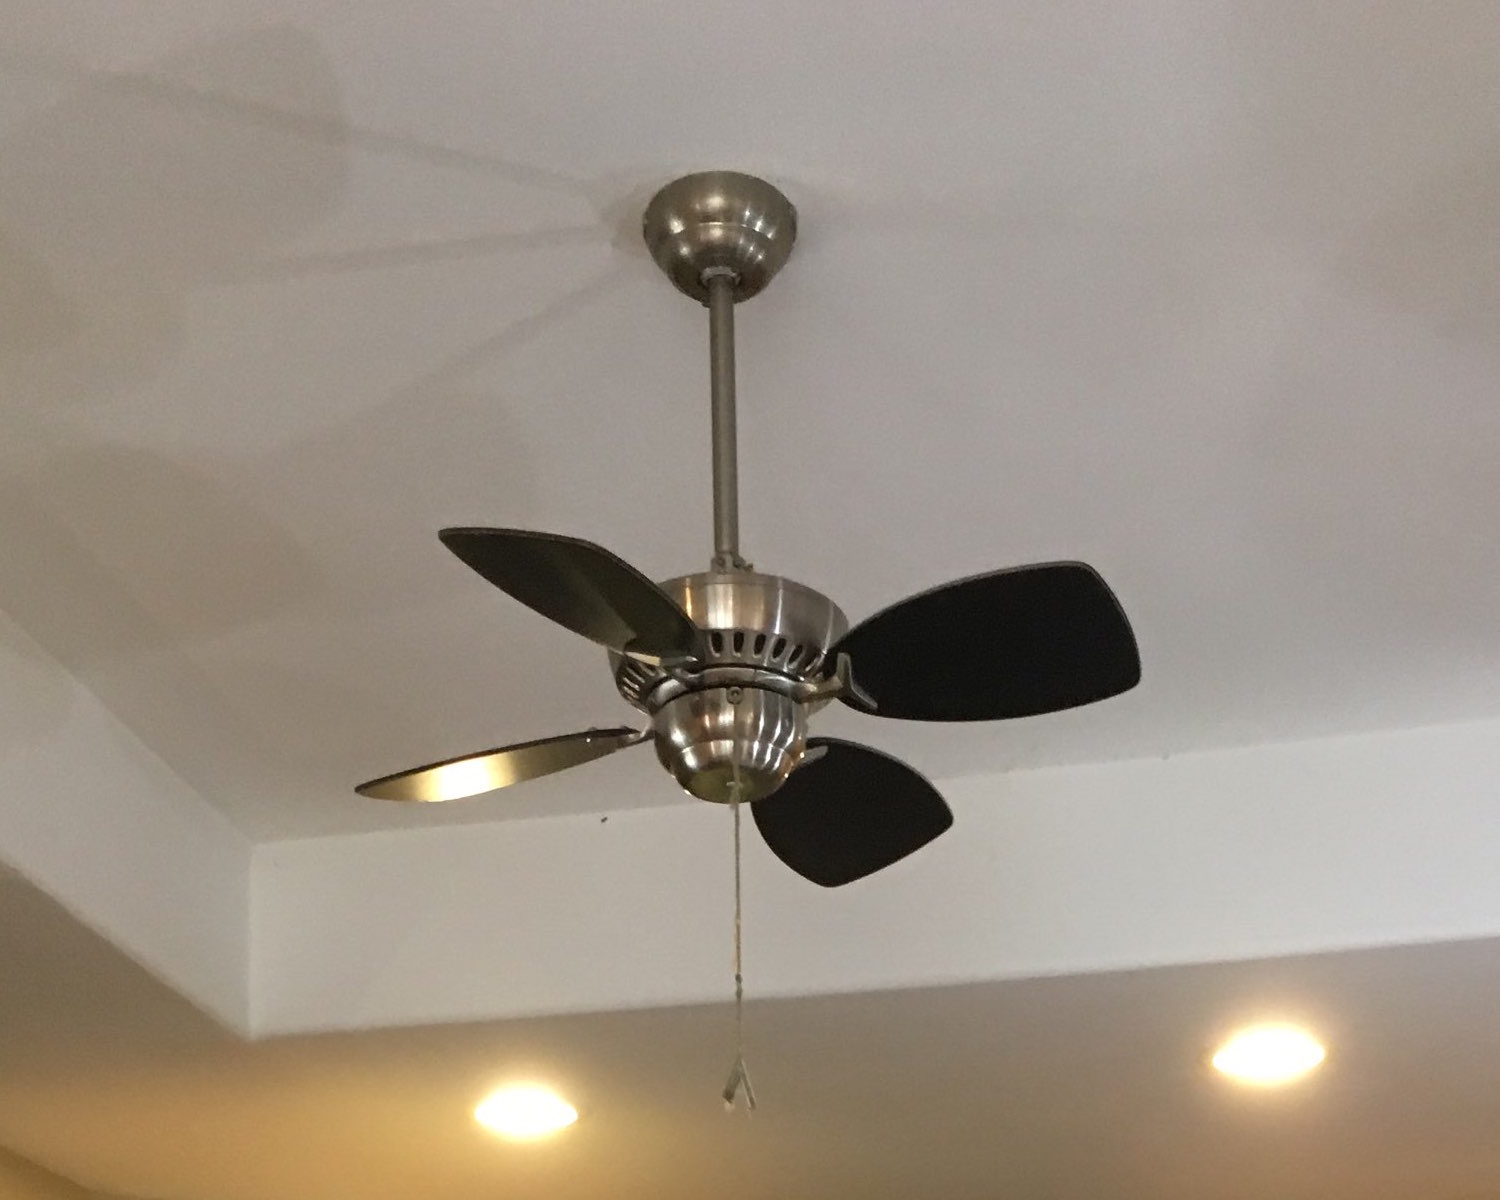 Does Having More Fan Blades Allow for Greater Air Movement?